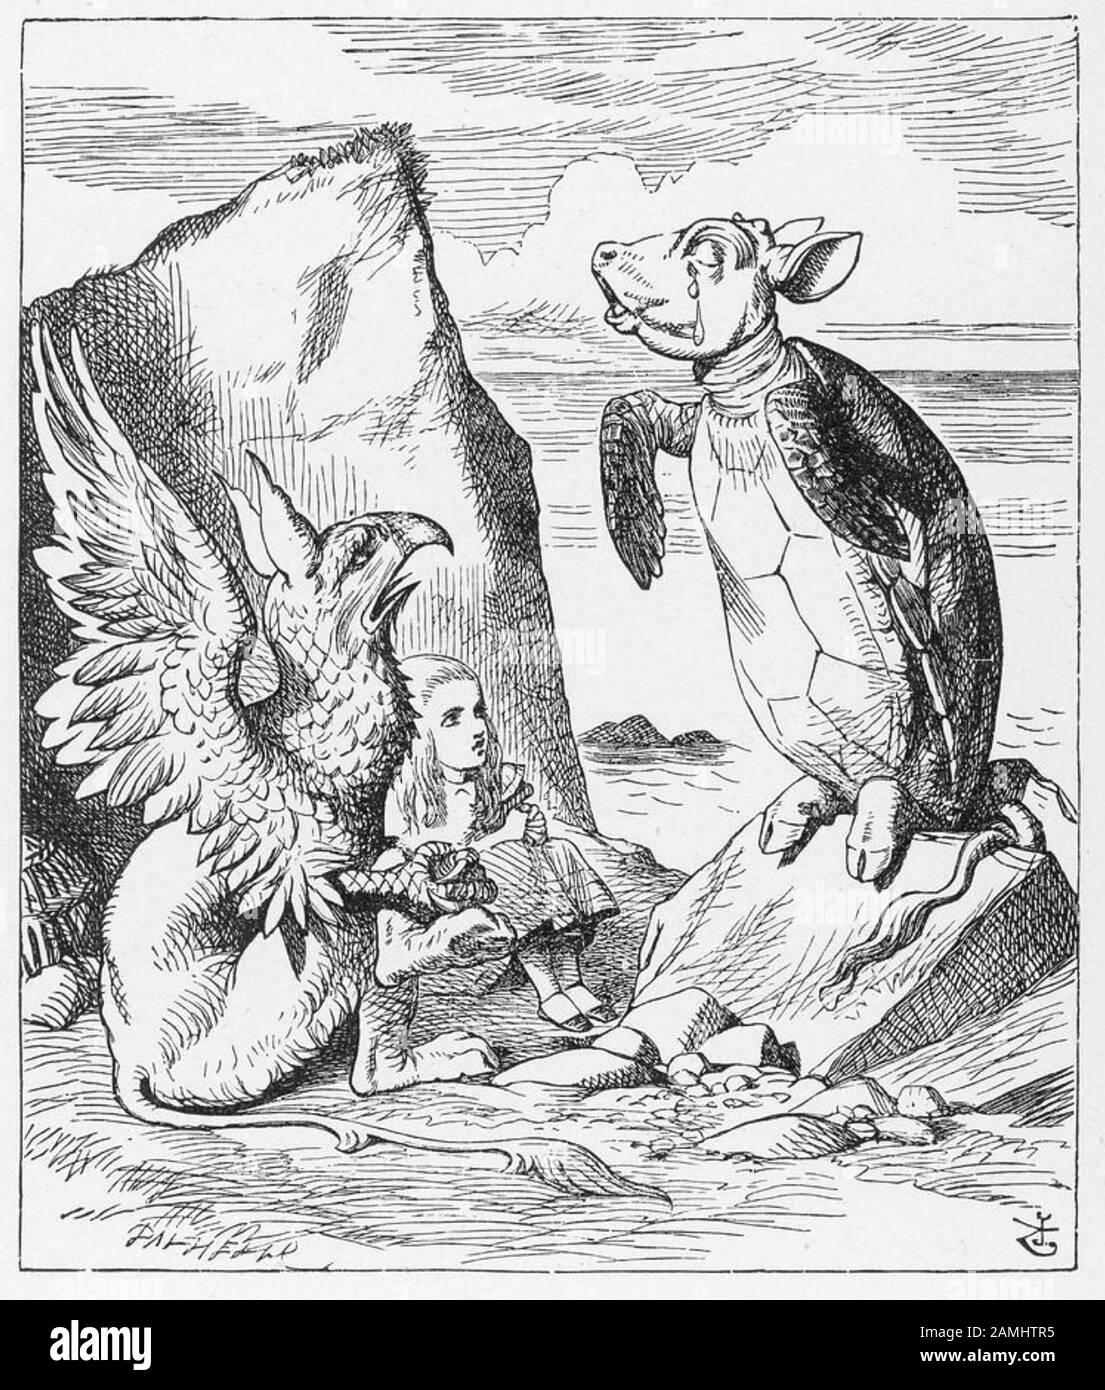 MOCK TURTLE with Alice and the Gryphon in John Tenniel's illustration for ALICE'S ADVENTURES IN WONDERLAND 1865. Stock Photo